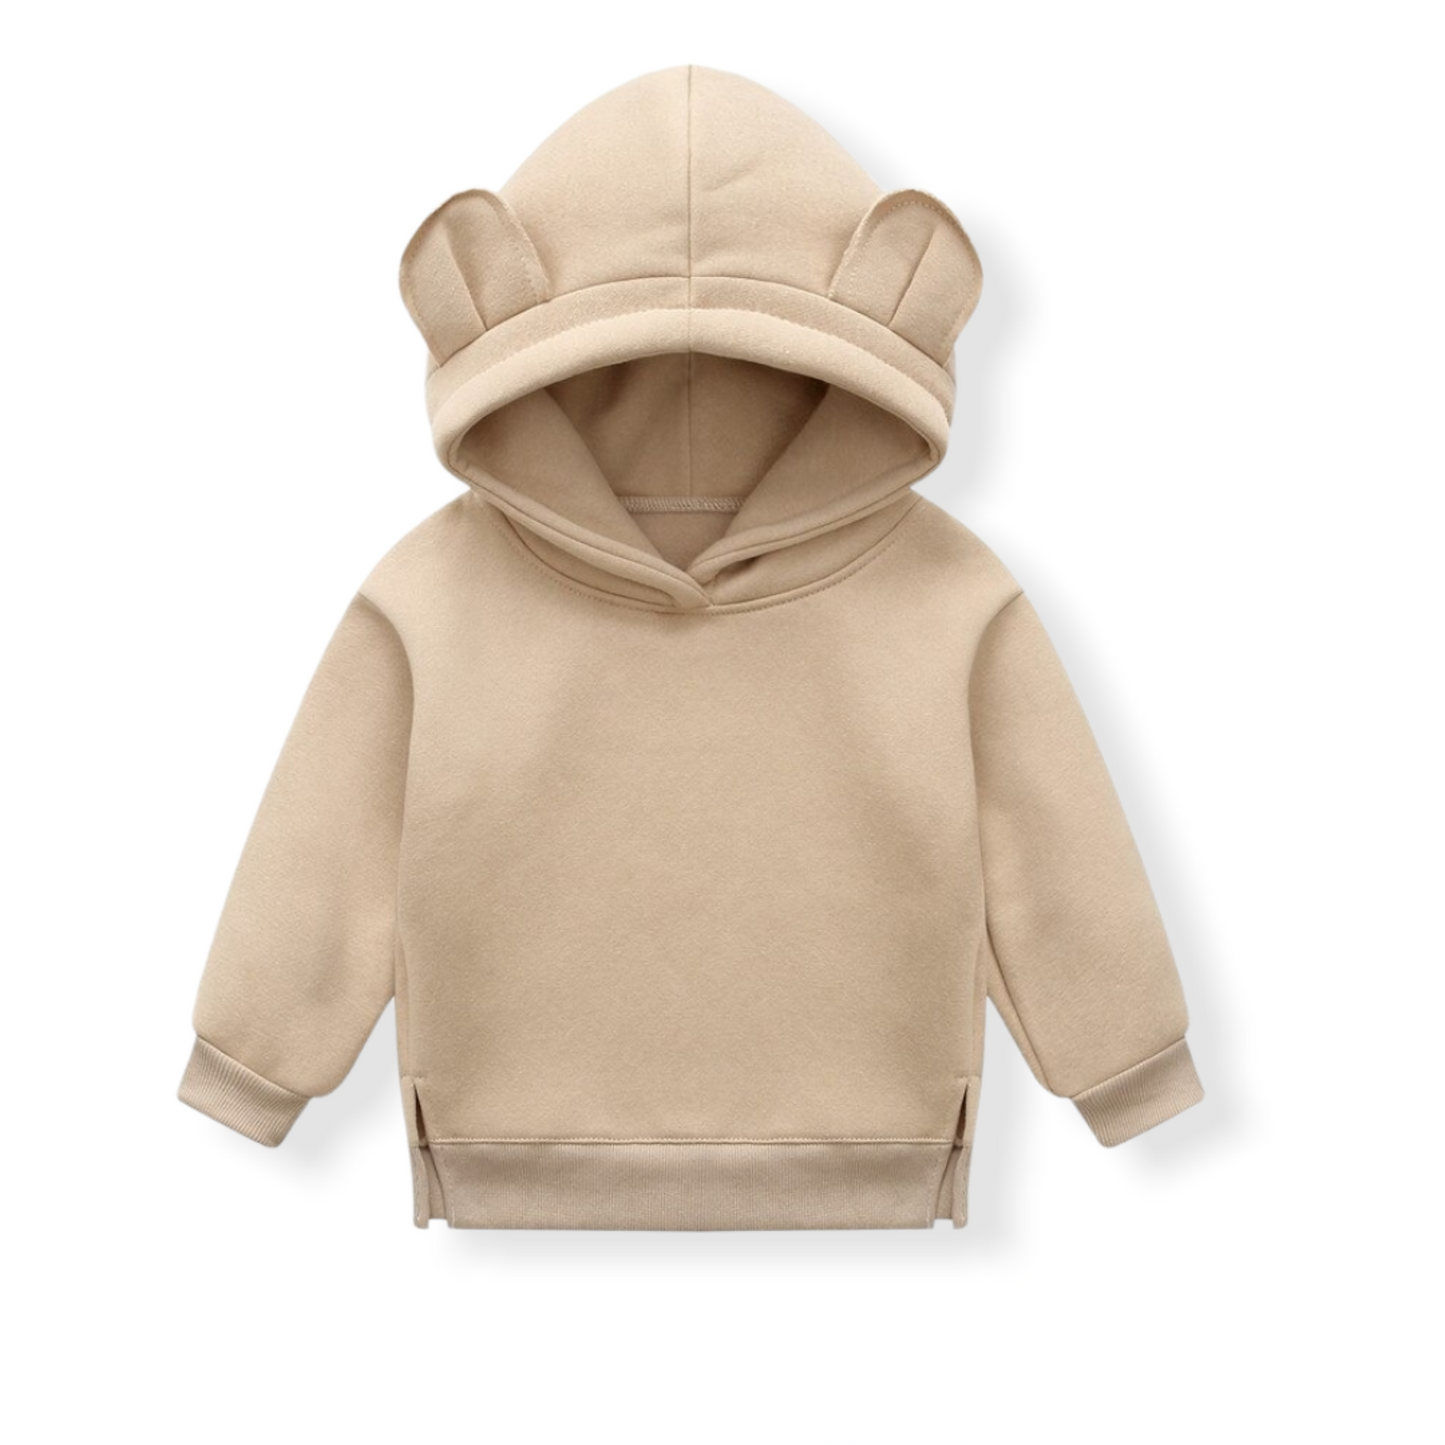 Soft hoodie with Ears for Toddlers in Green- Details